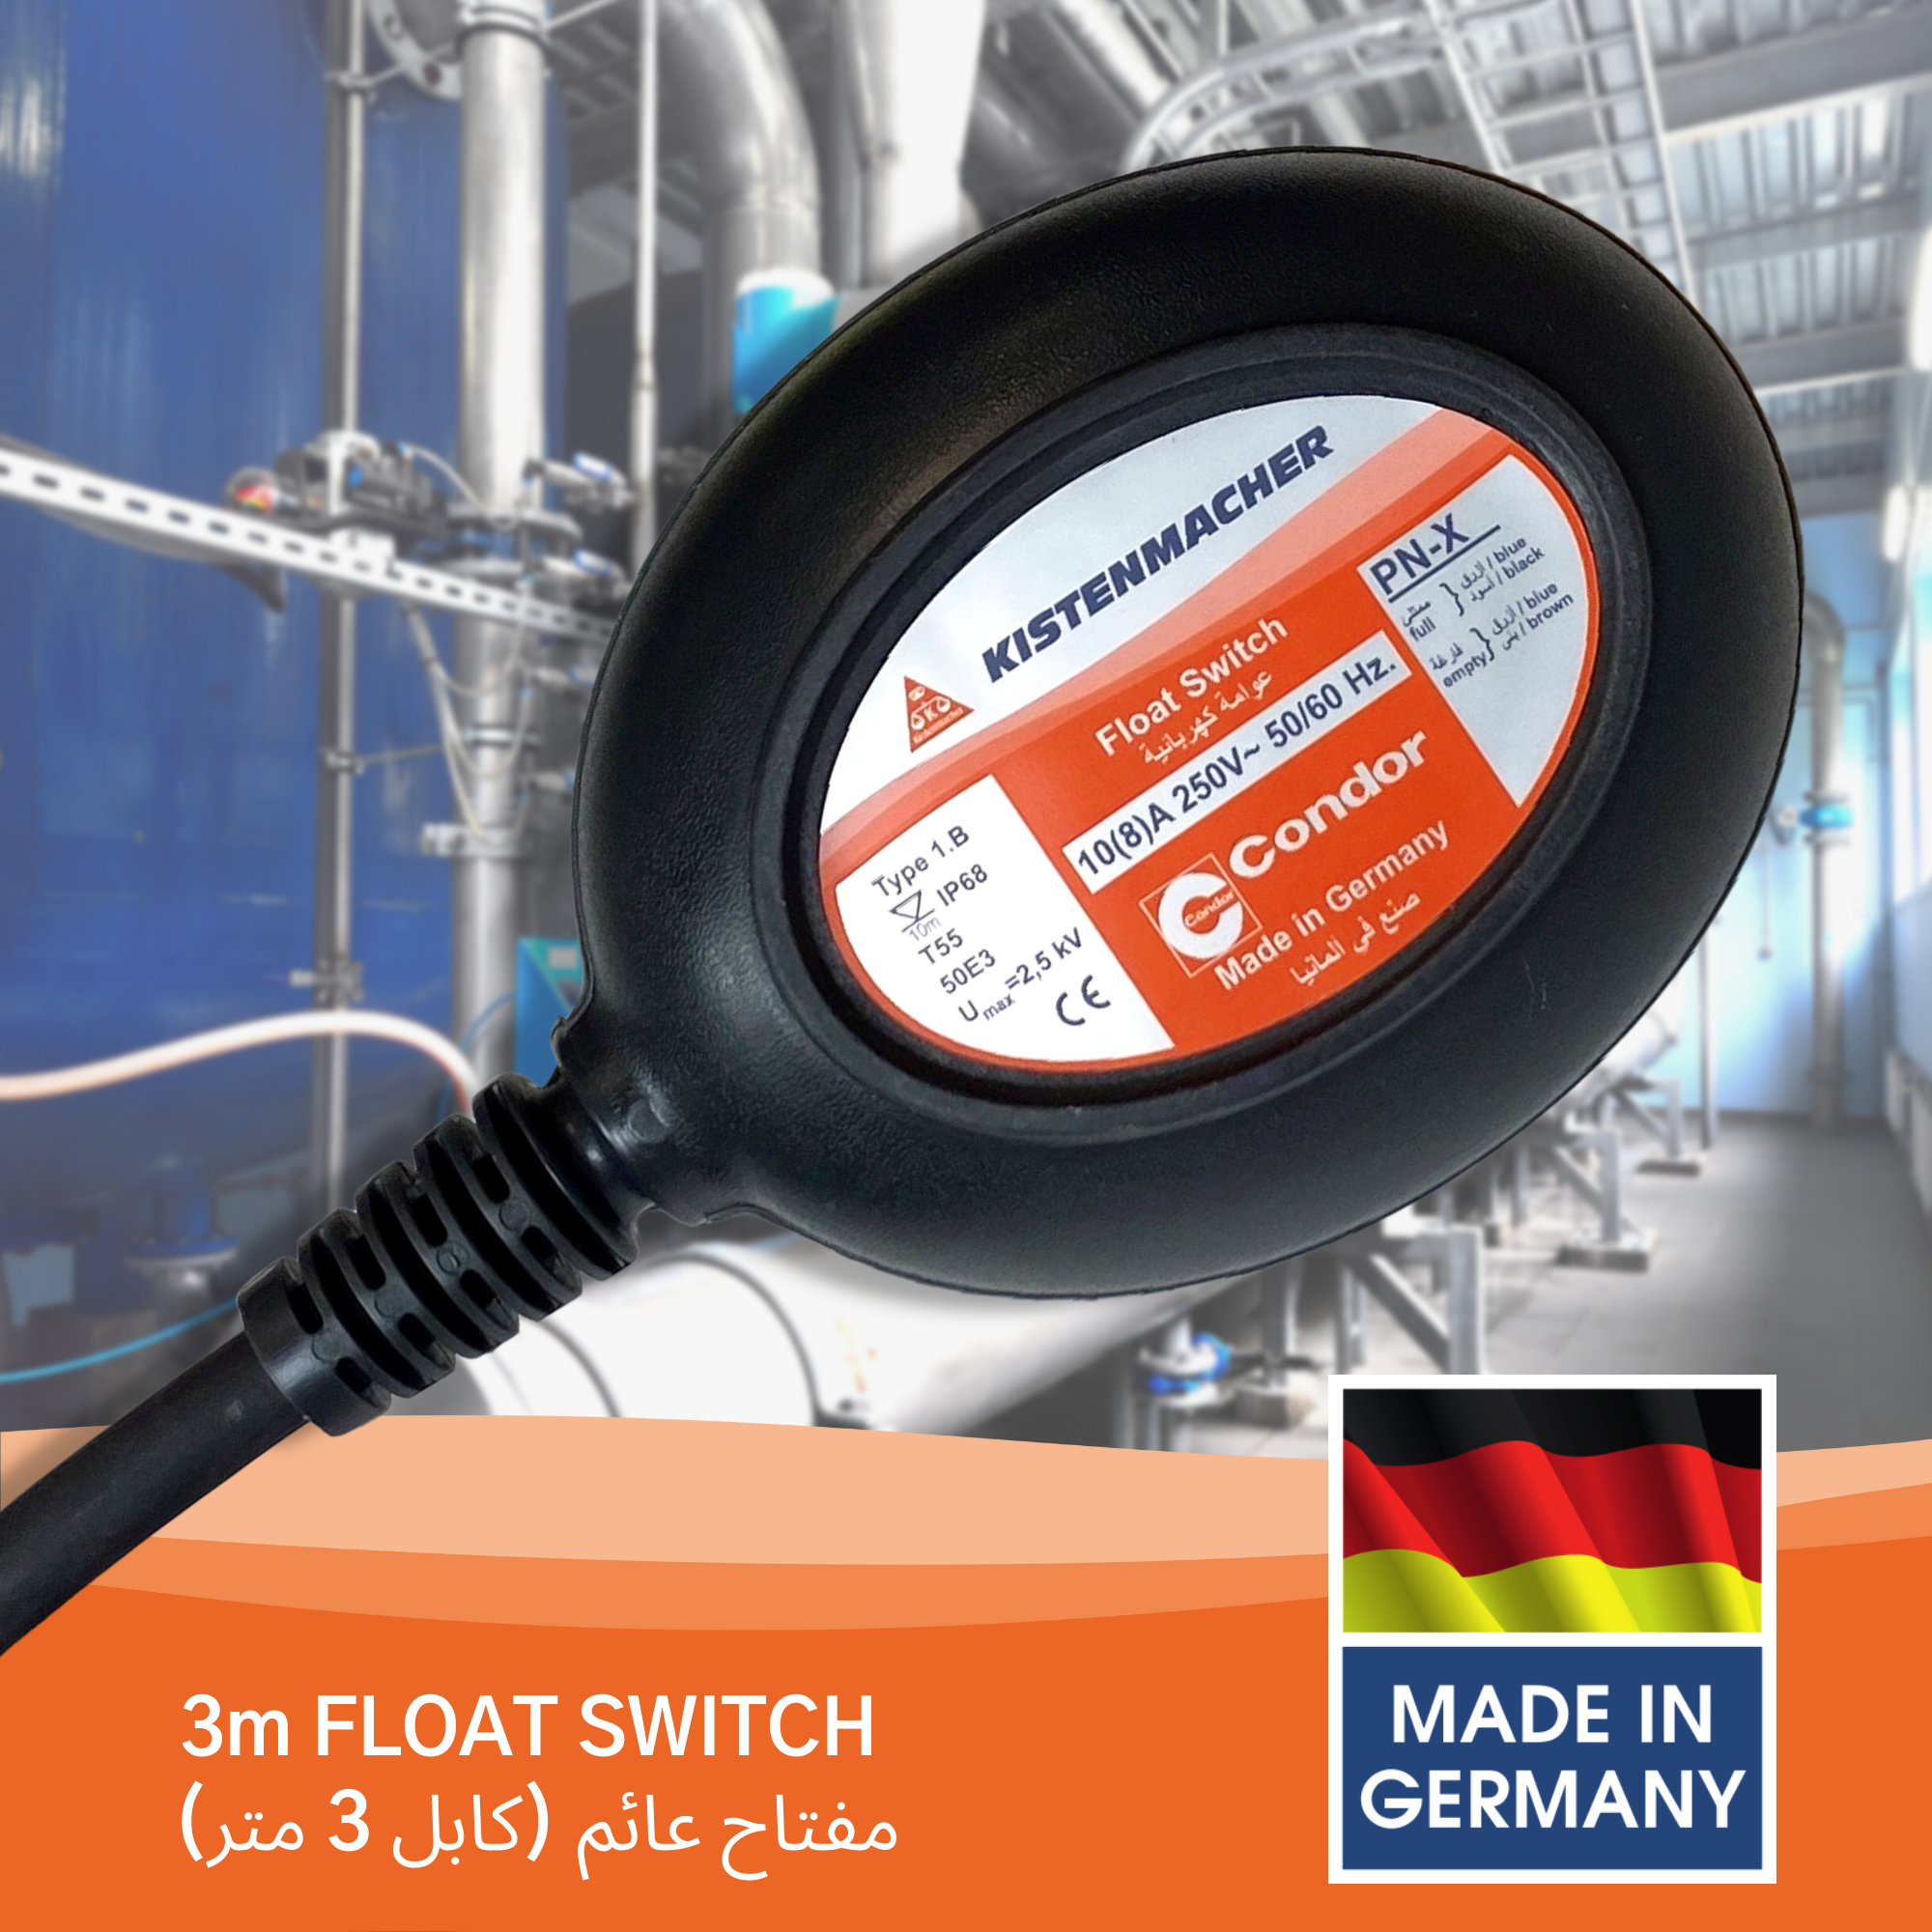 KISTENMACHER Float Switch, Made in Germany, 3m cable